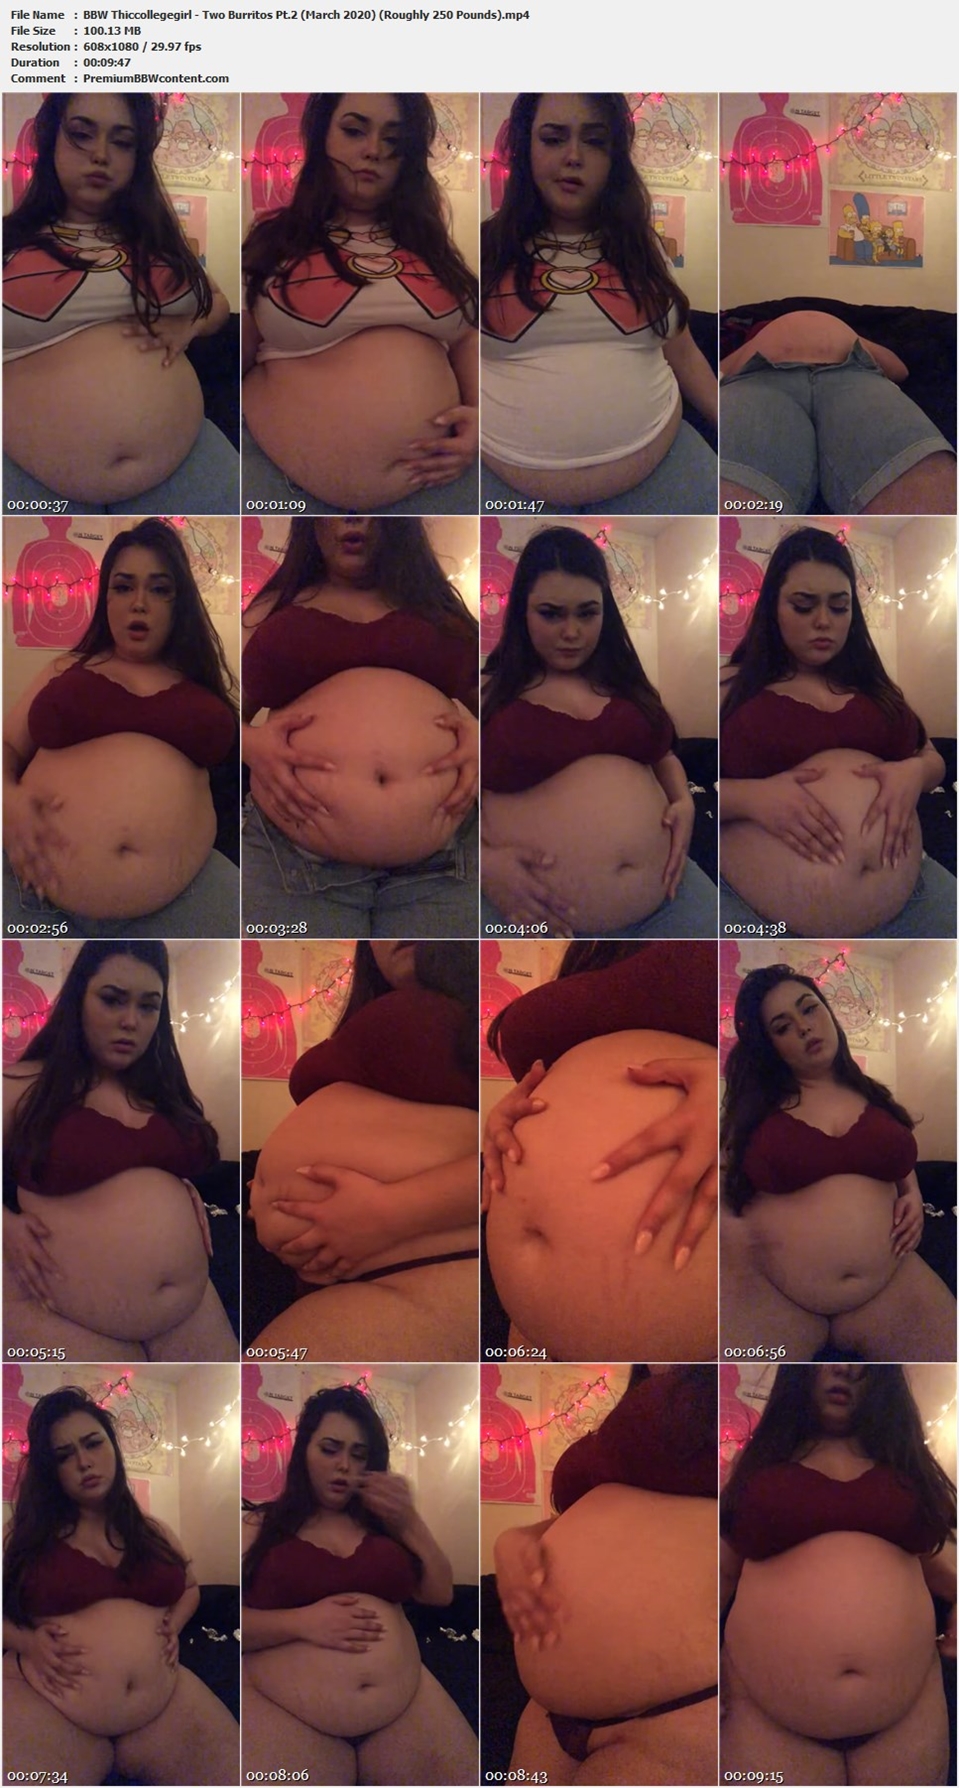 Bbw Red Pt 2 - BBW Thiccollegegirl - Two Burritos Pt.2 (March 2020) (Roughly 250 Pounds)